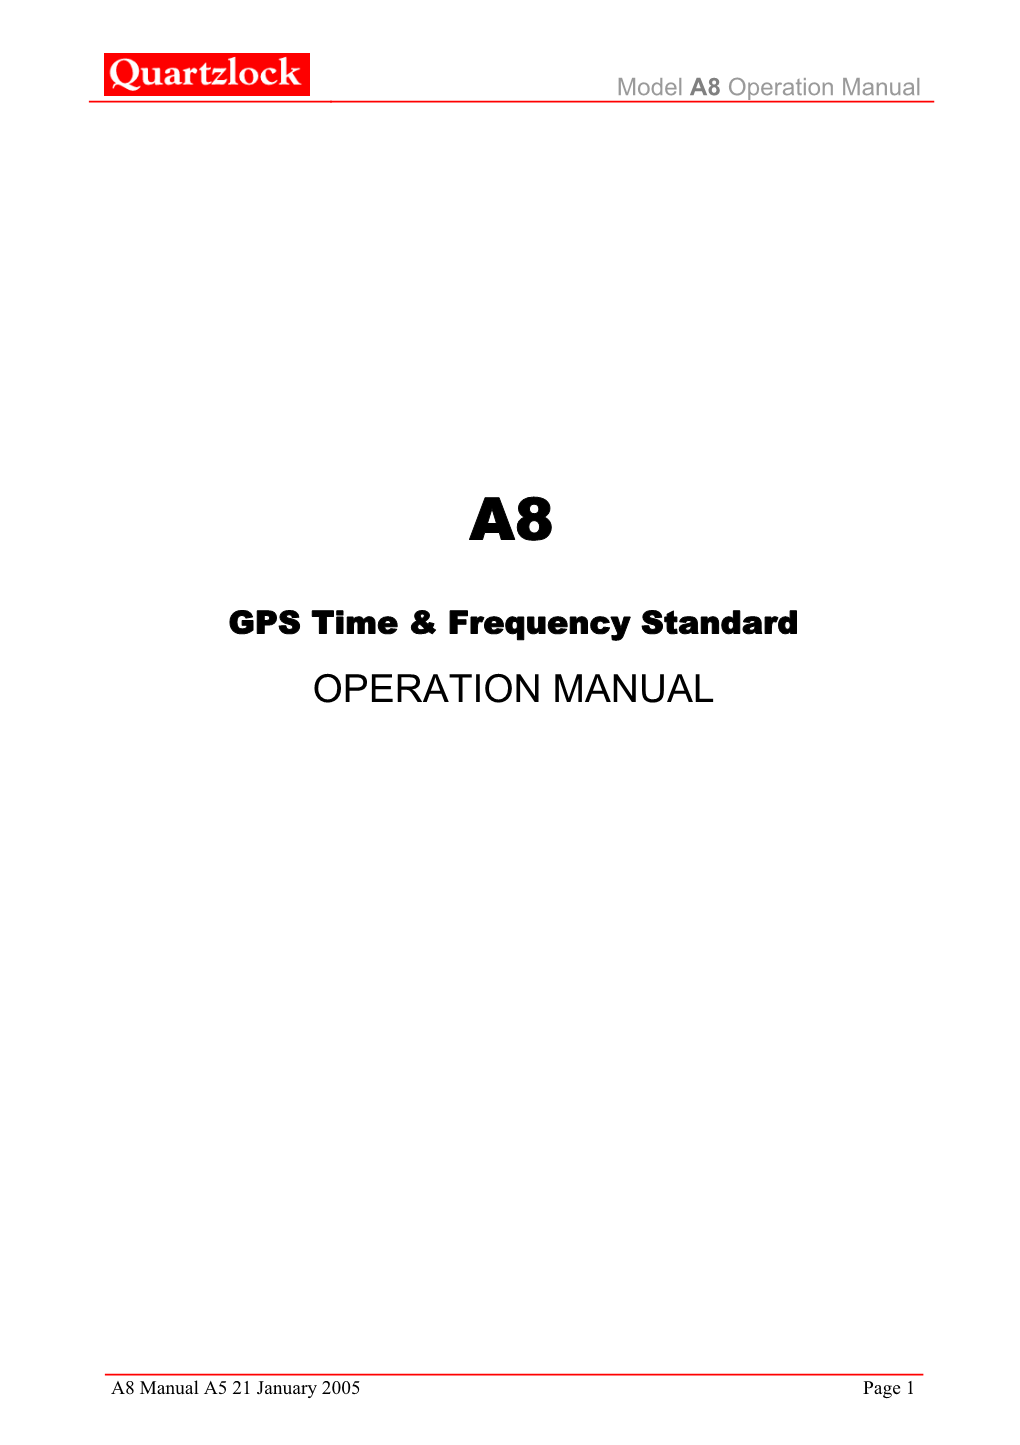 GPS Time & Frequency Standard